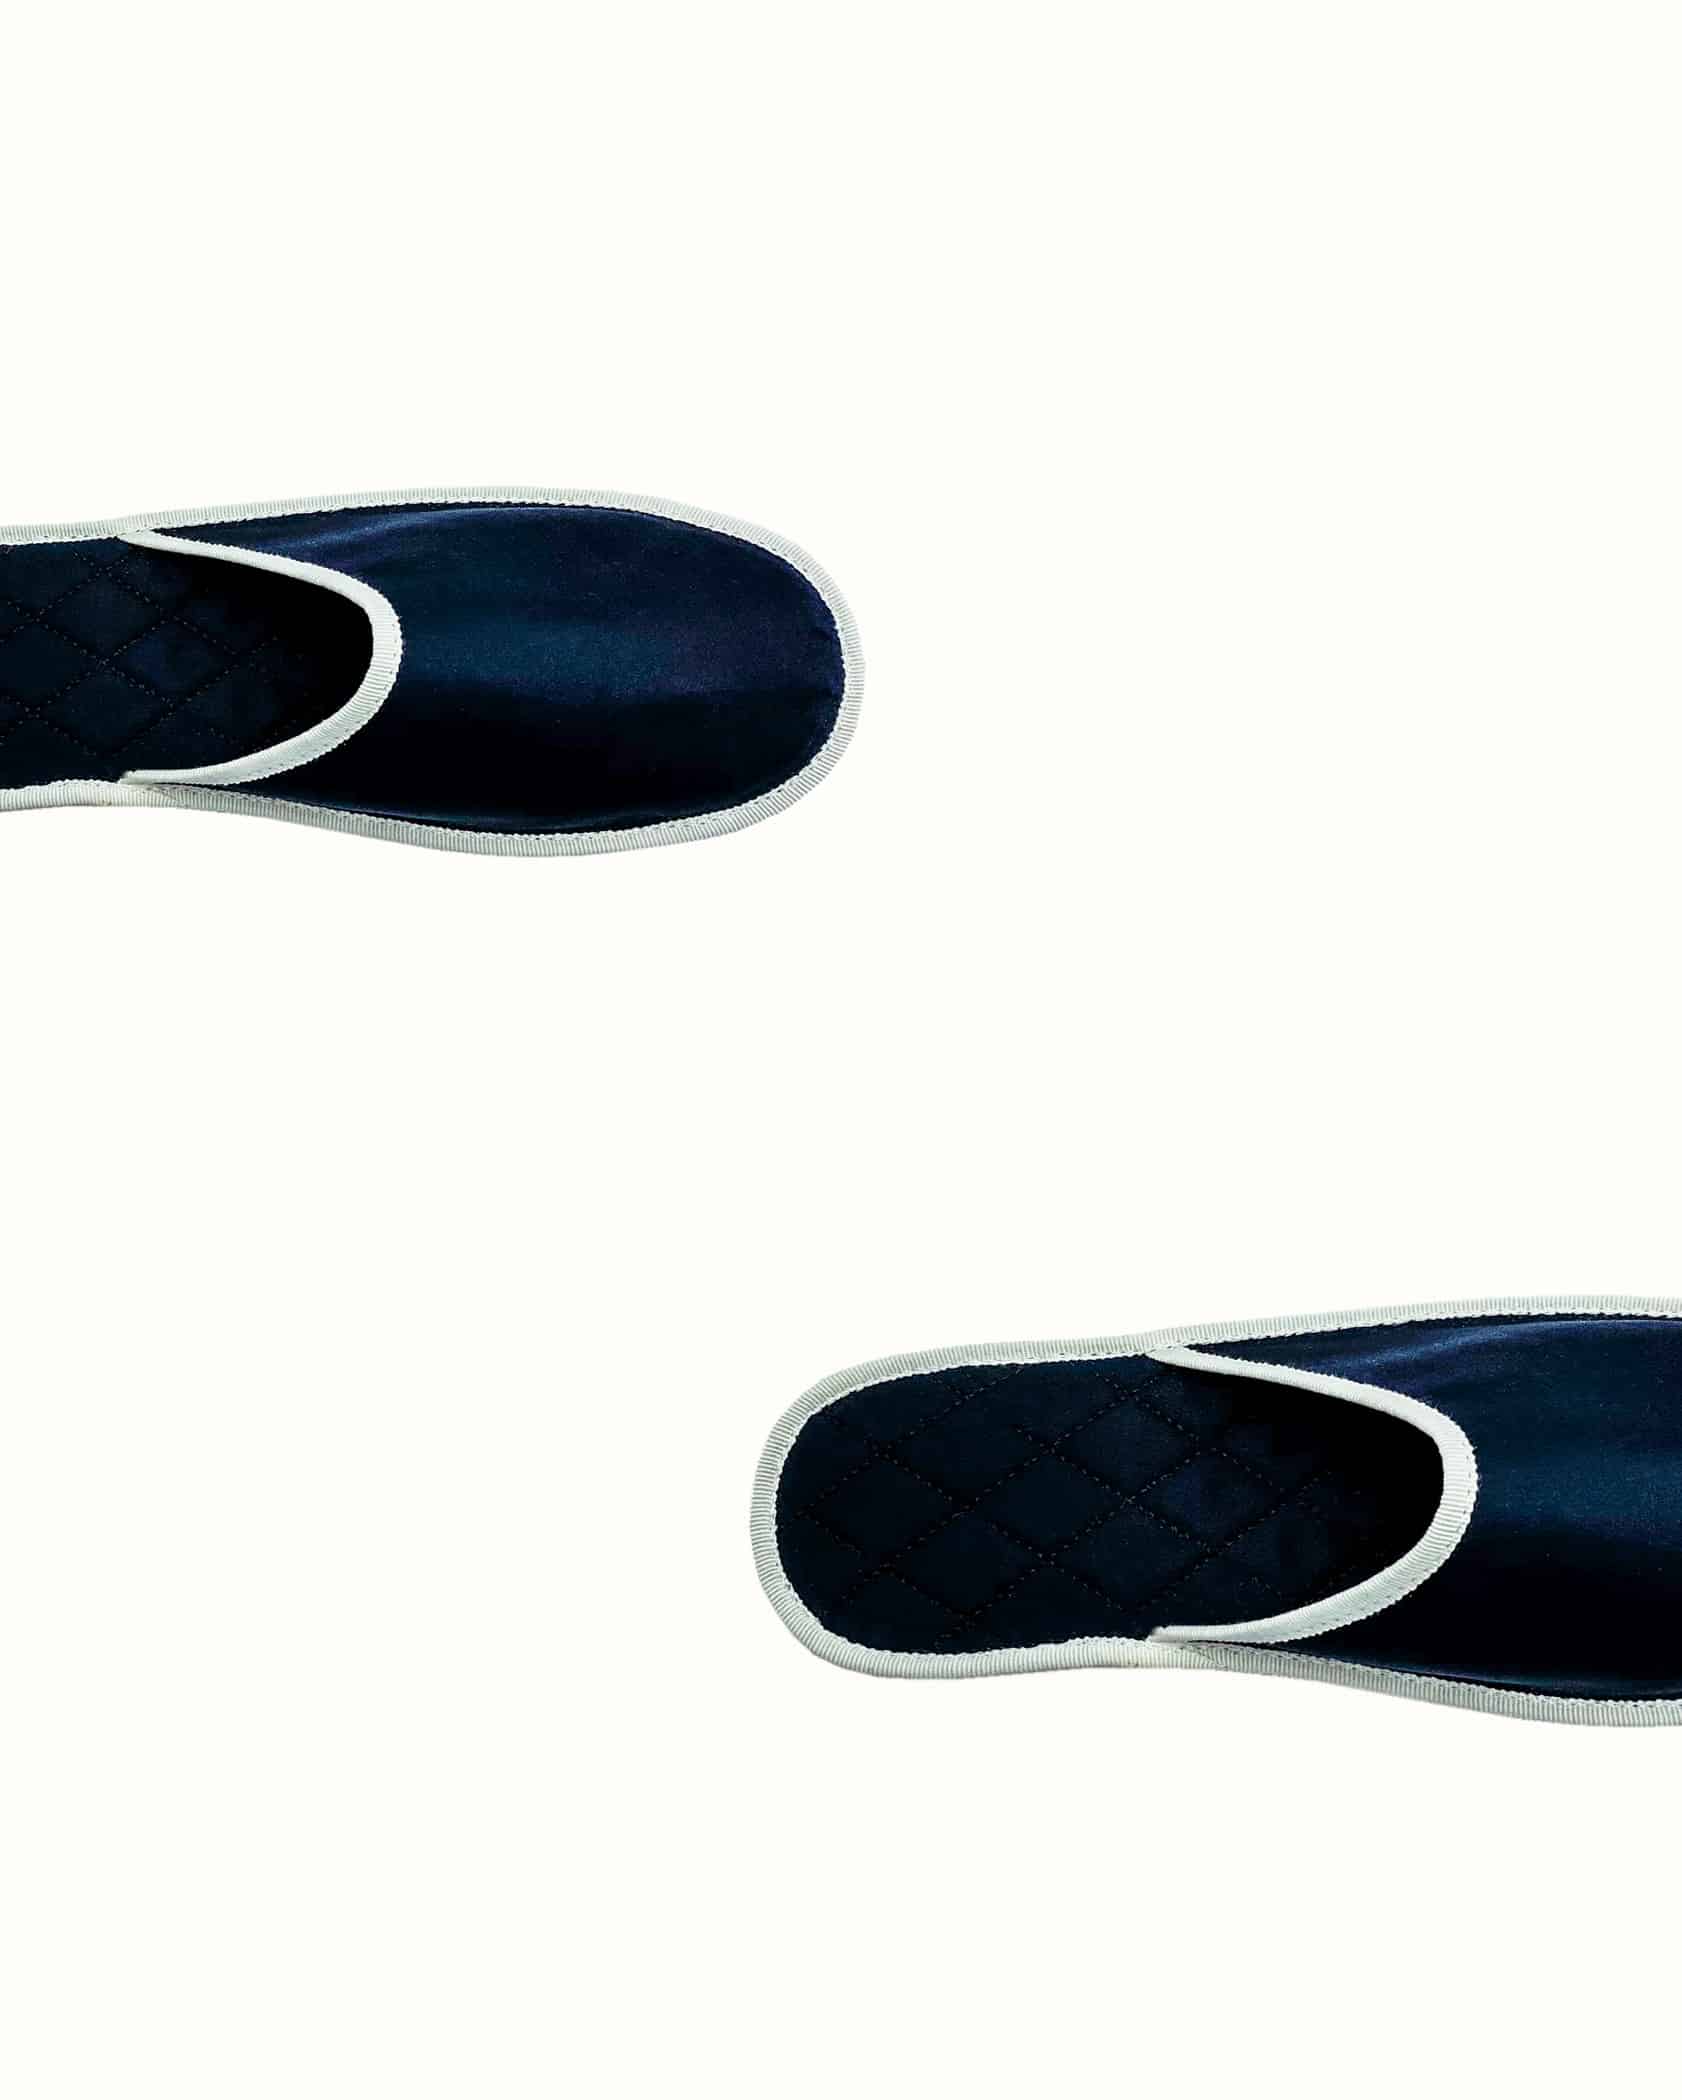 French slippers for men, women and kids. Le Spleen "Outrenoir", navy blue and white. A slip-on like hotel slippers with a quilted padding and an outstanding craftsmanship manufacturing. Made in France.